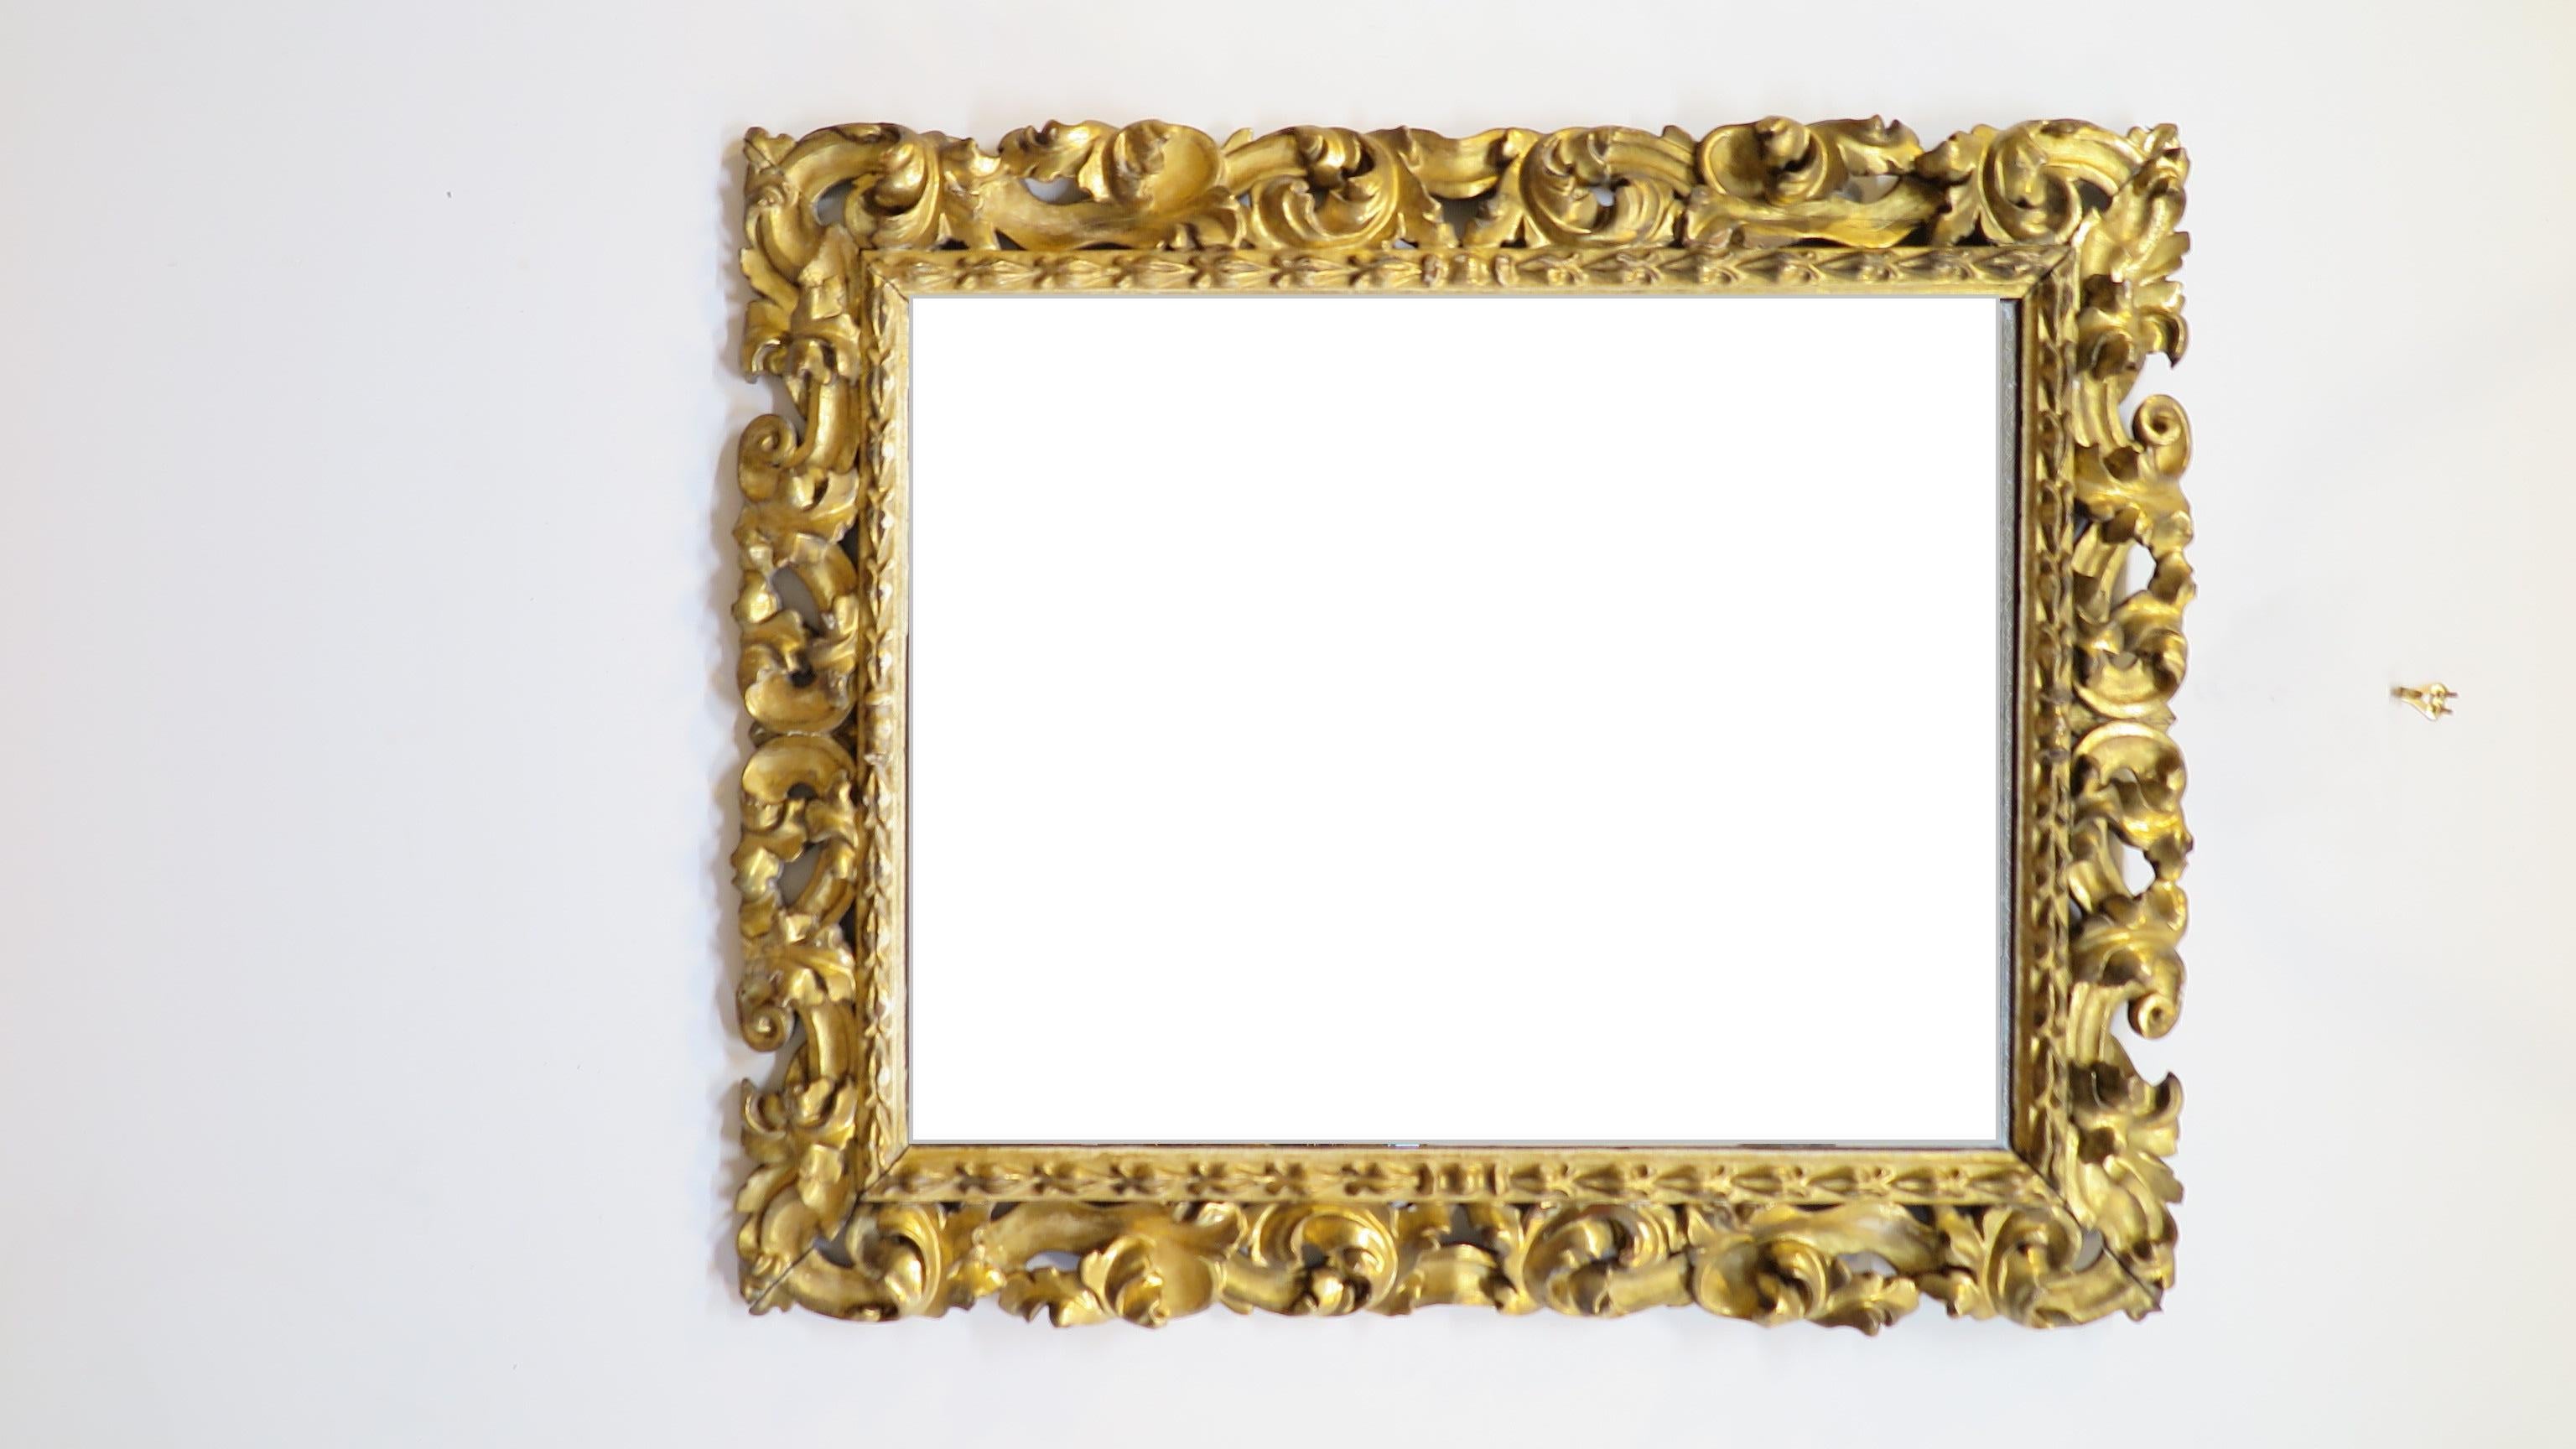 Italian 19th century baroque hand carved mirror. Hand carved of solid wood from the middle 19th century having Gesso and gold leaf. Acanthus leaf carving adorns the mirror frame. Glass and mirror affect are clear with good reflection. Some age spots